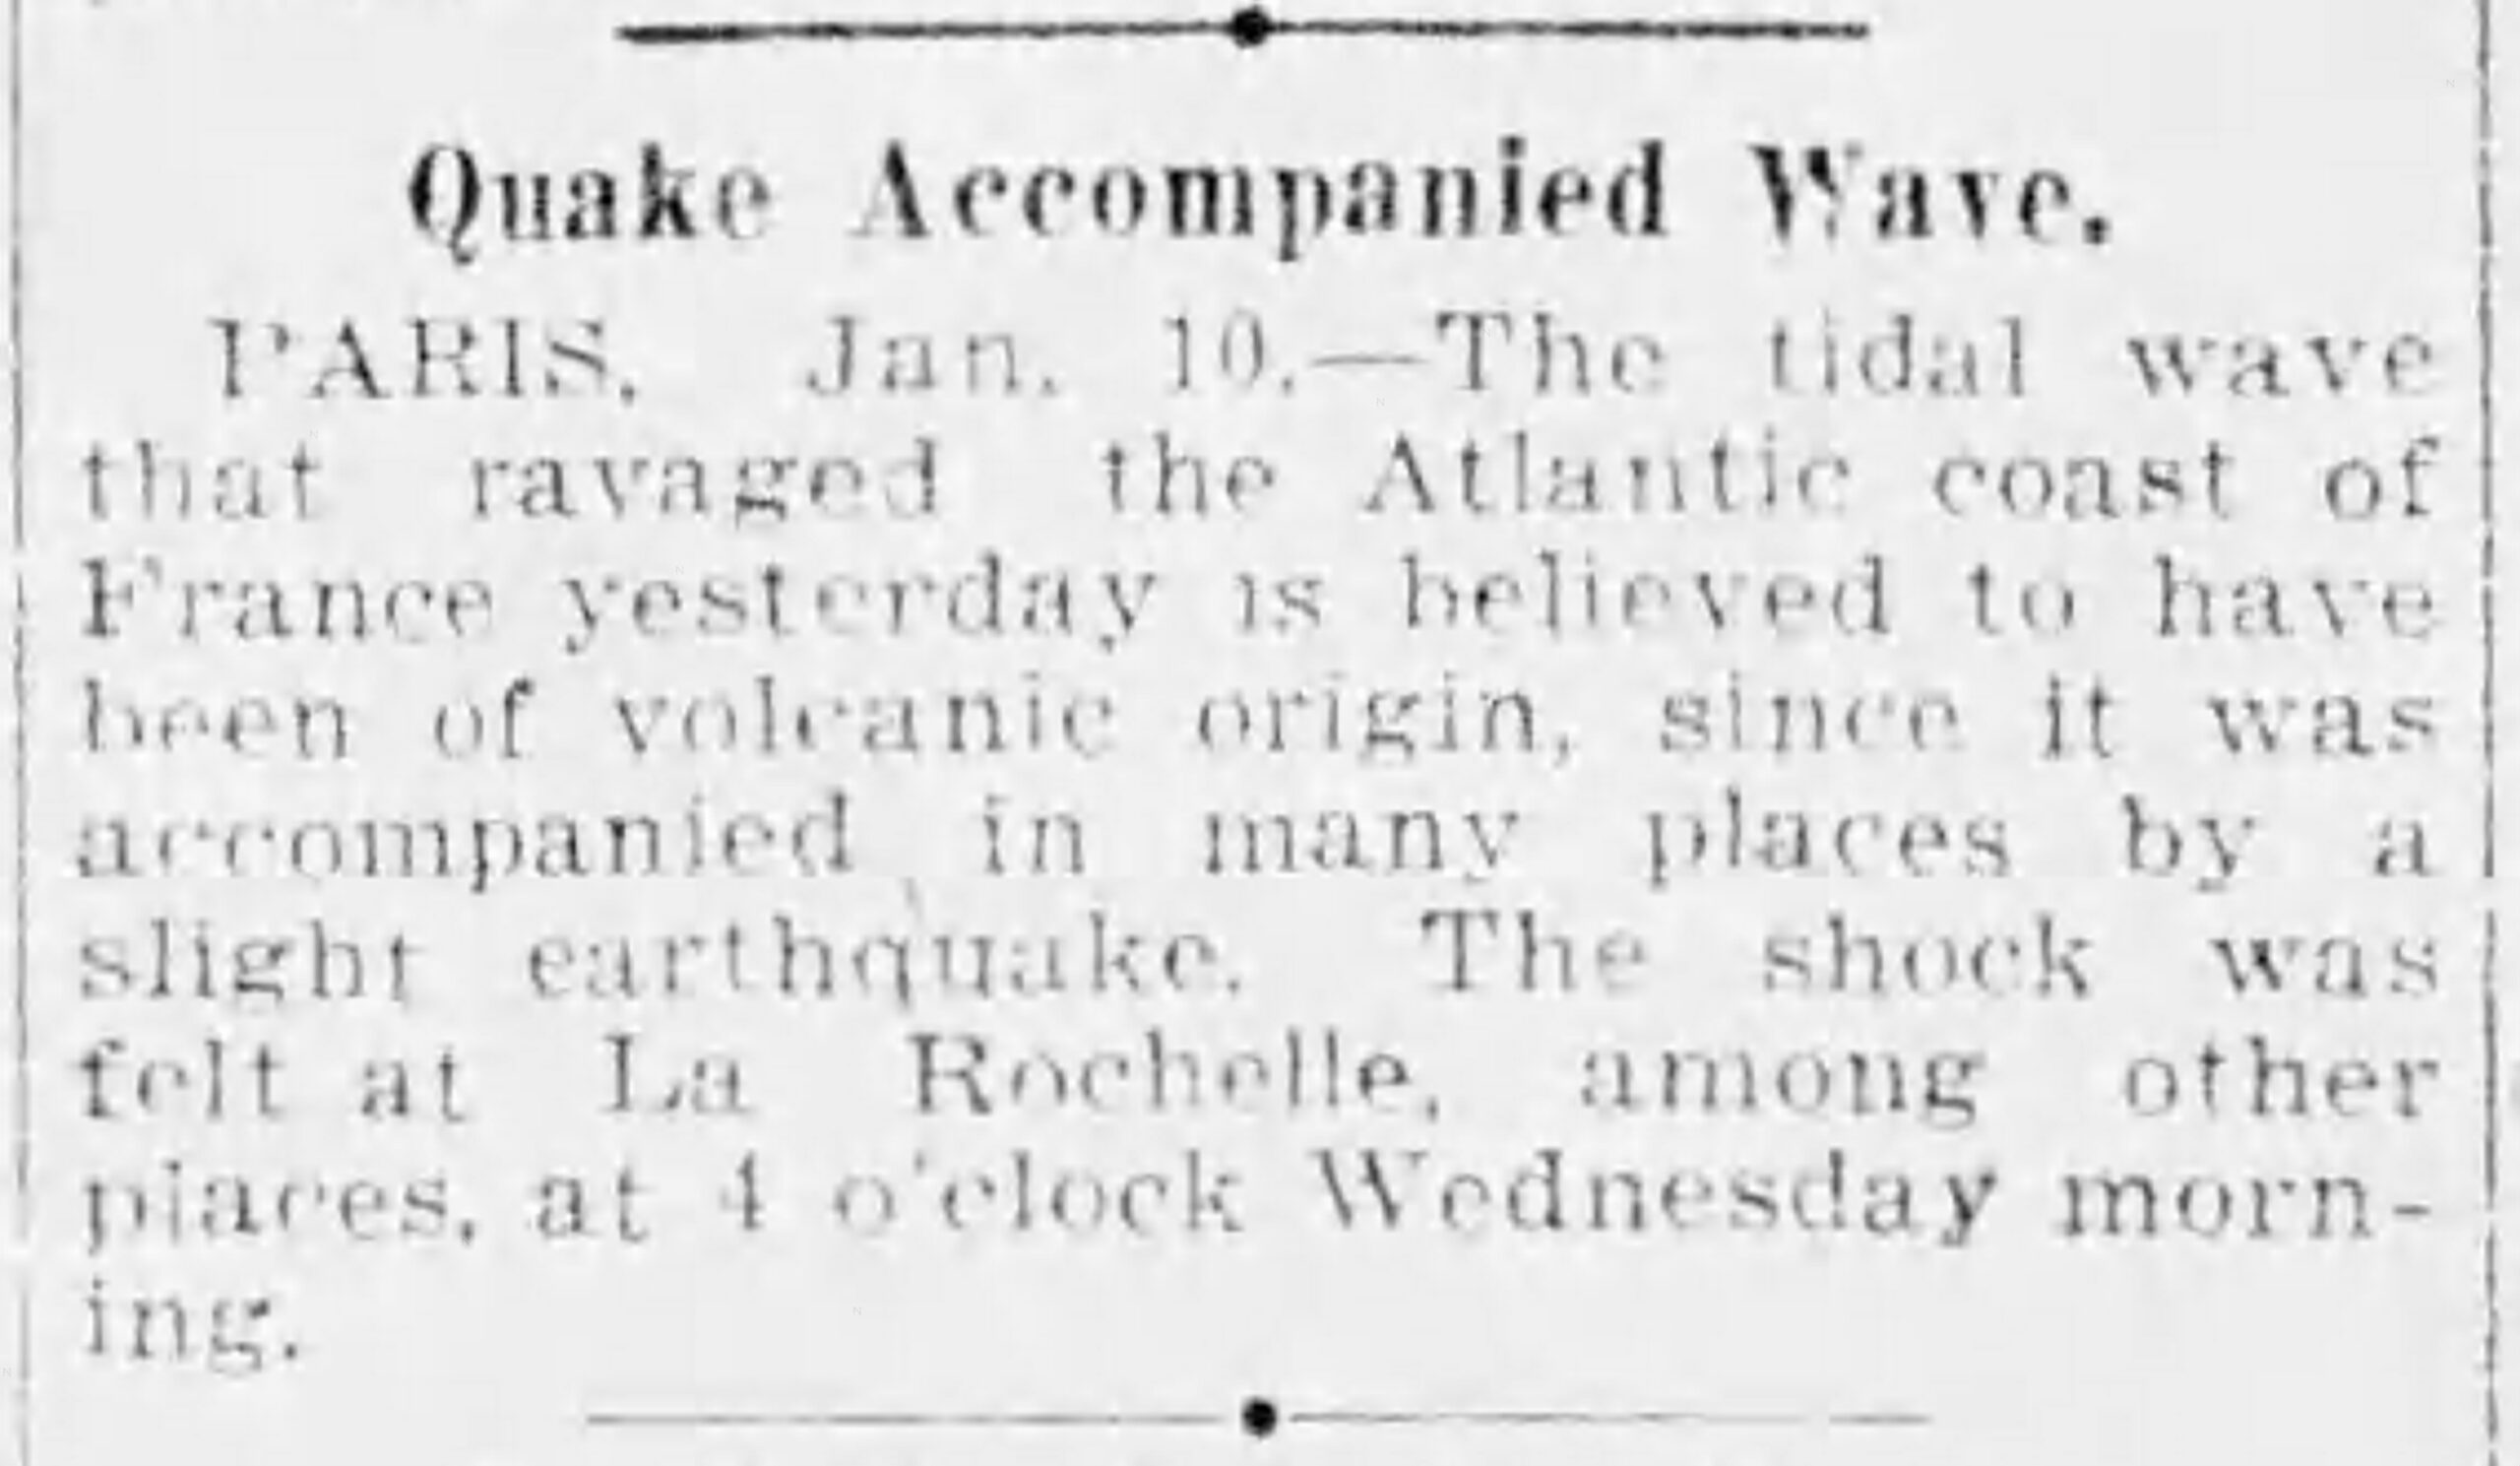 News from January 10, 1924